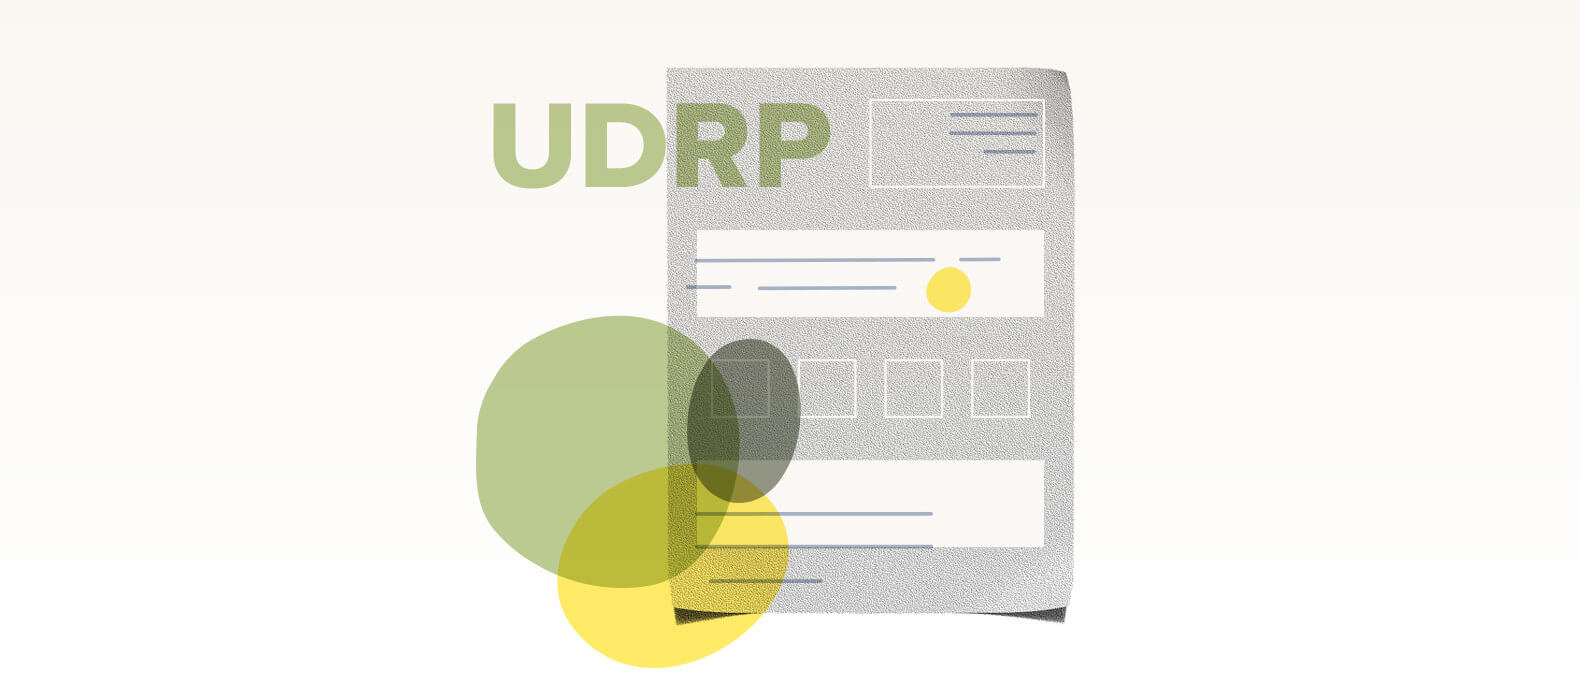 How to file a UDRP complaint